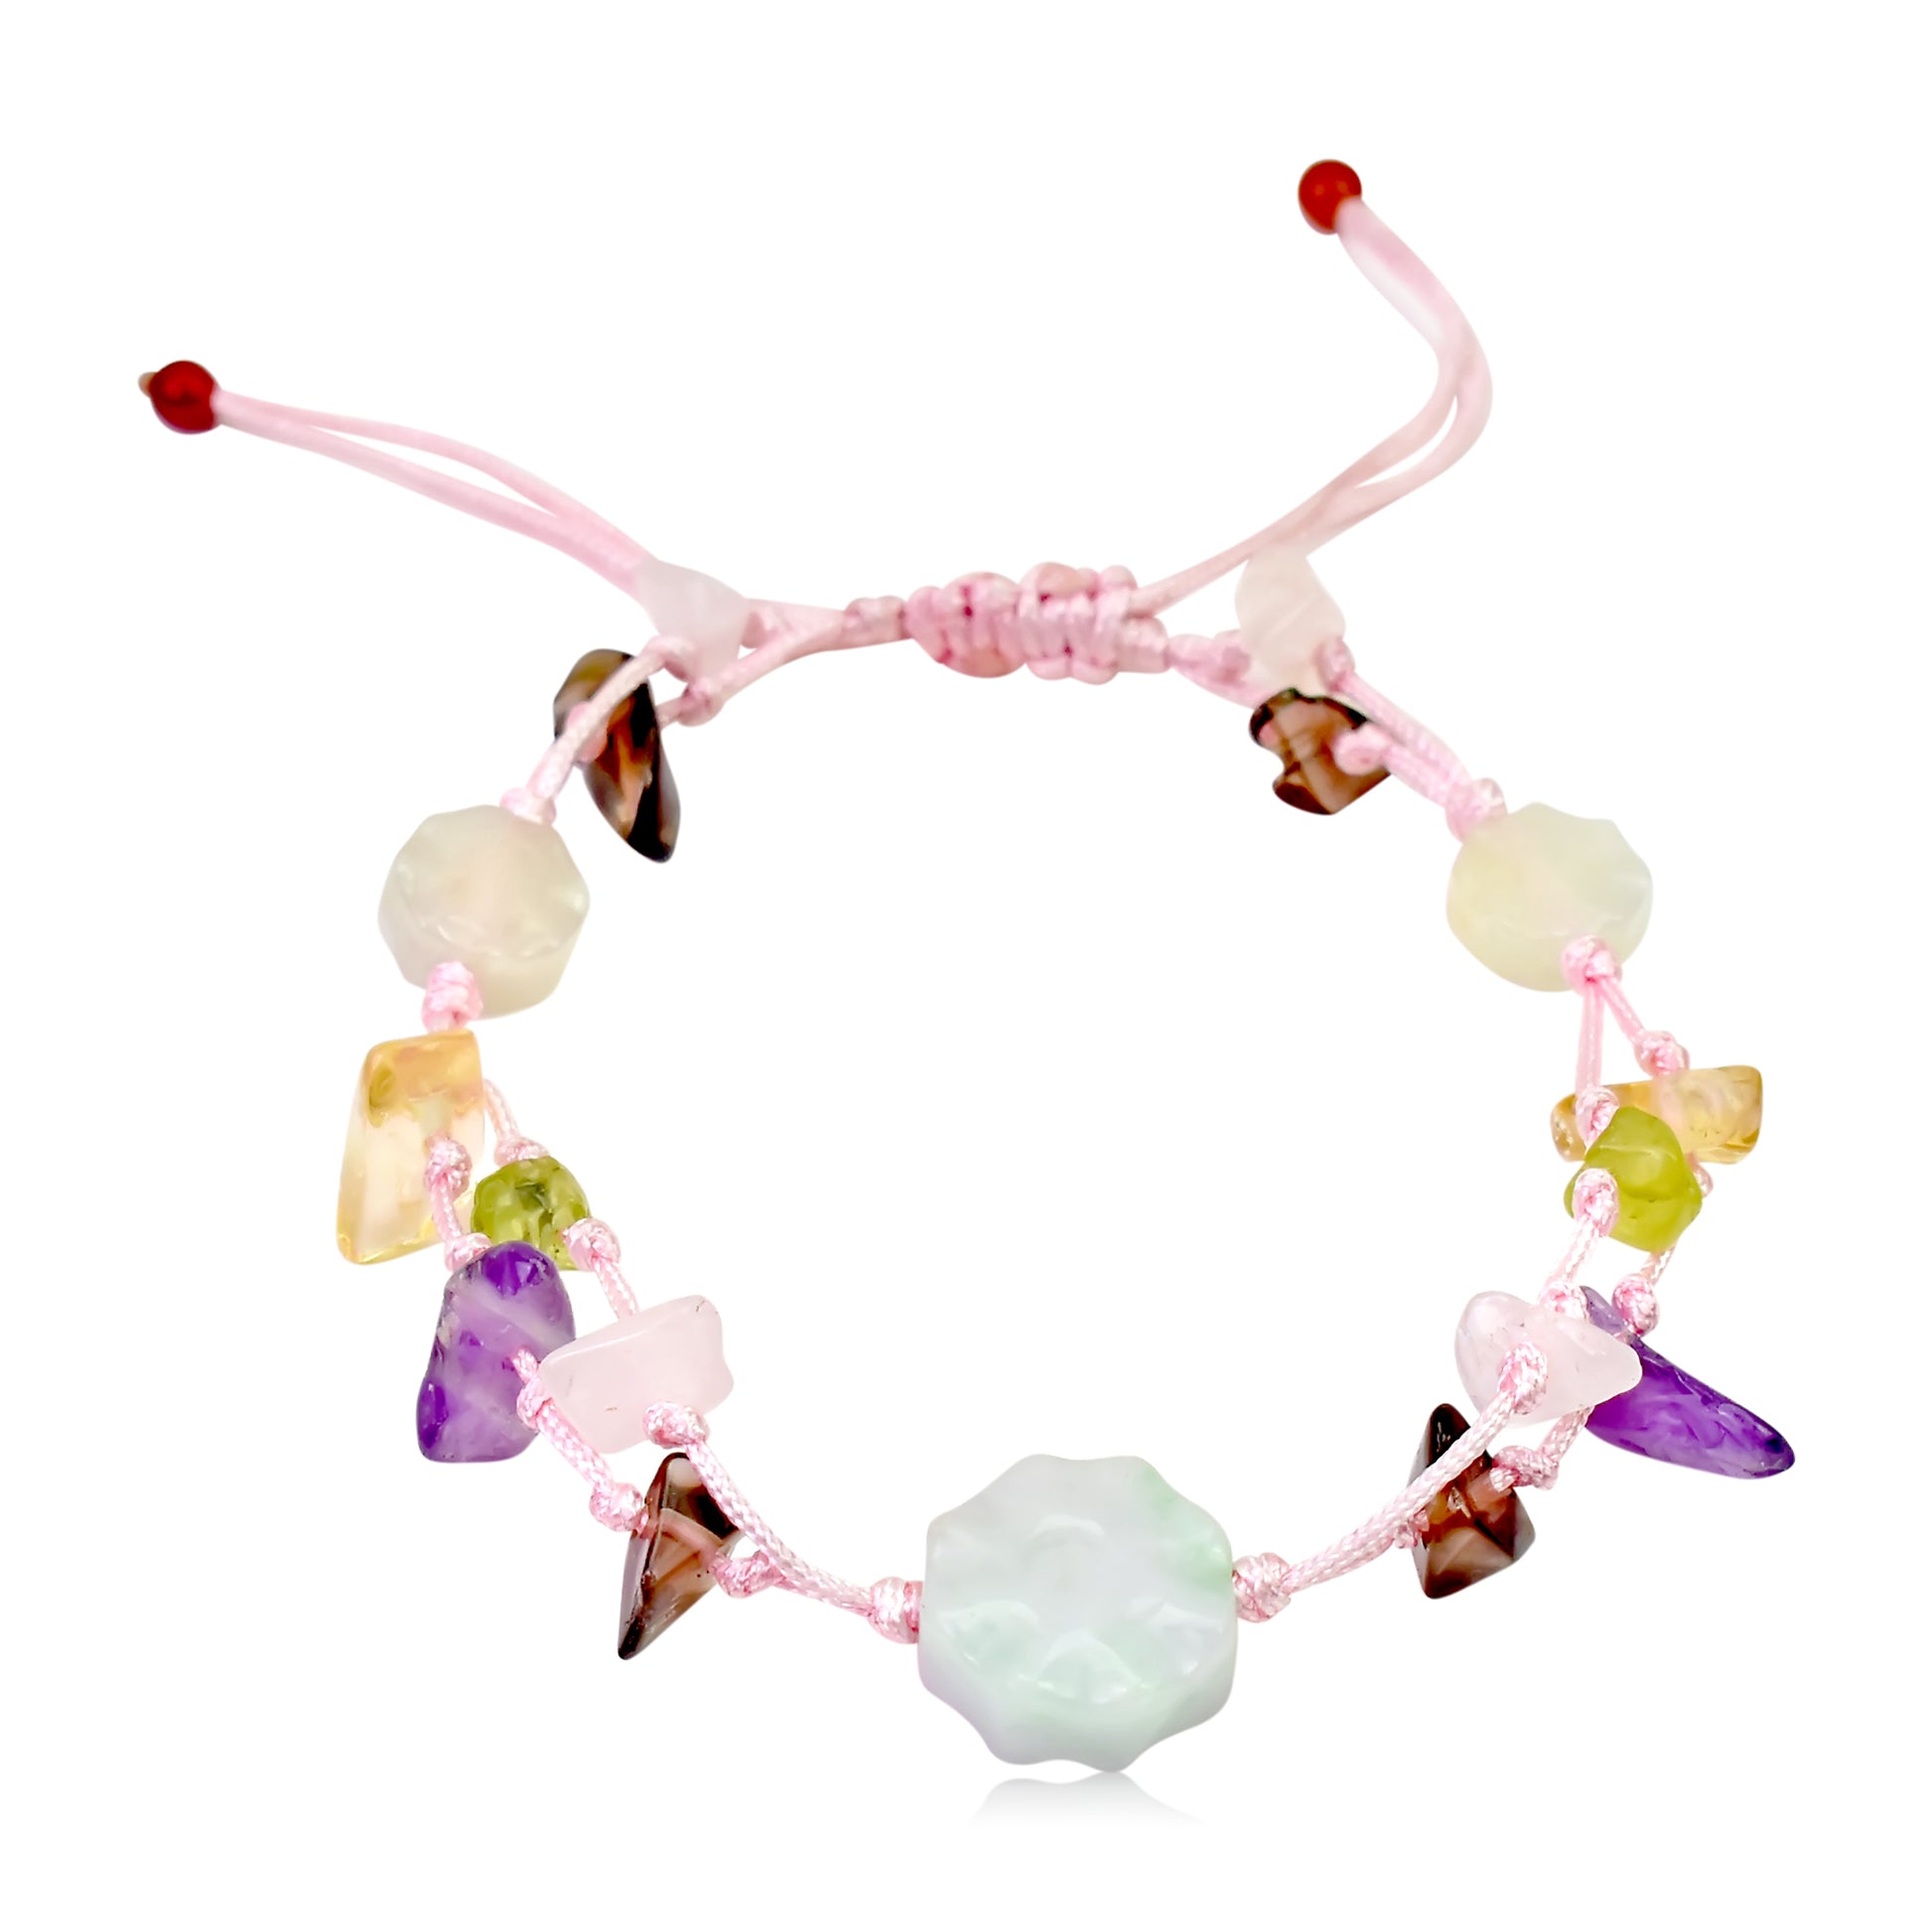 Bring Balance to Life with this Ying And Yang Gemstone Bracelet